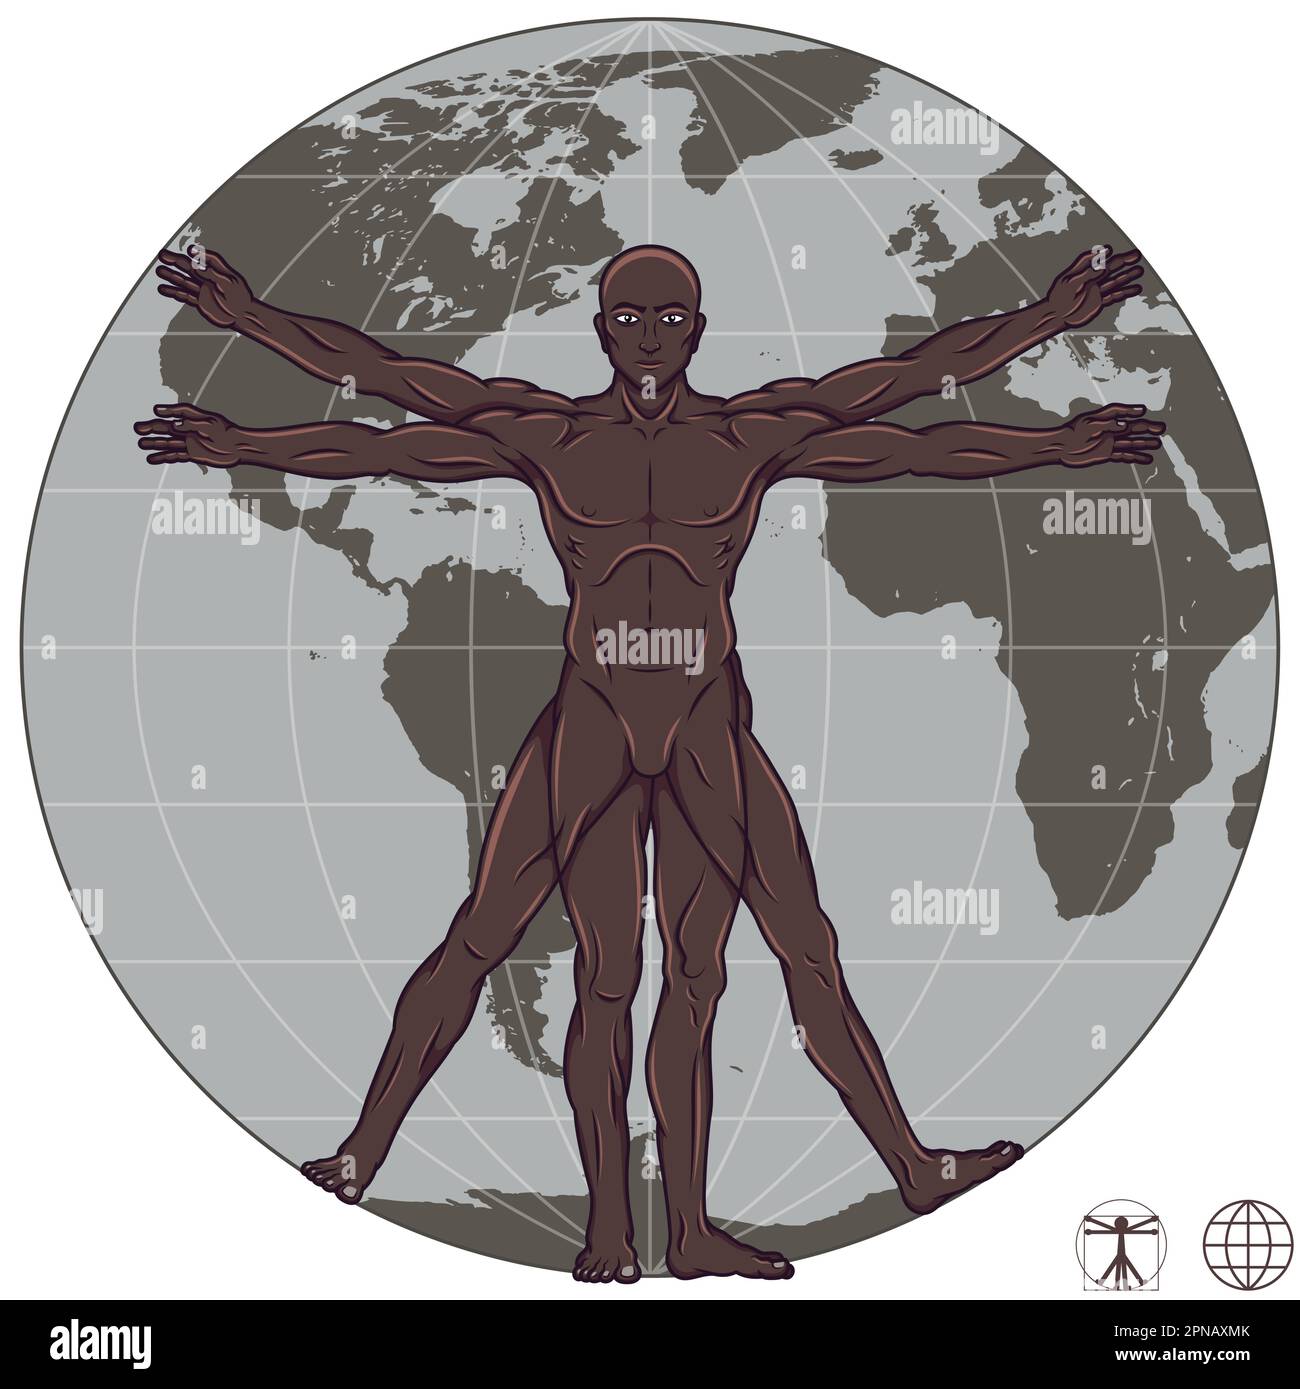 Vector design of Leonardo da Vinci's Vitruvian Man, Study of the Ideal Proportions of the Human Body, with planet Earth in the background Stock Vector